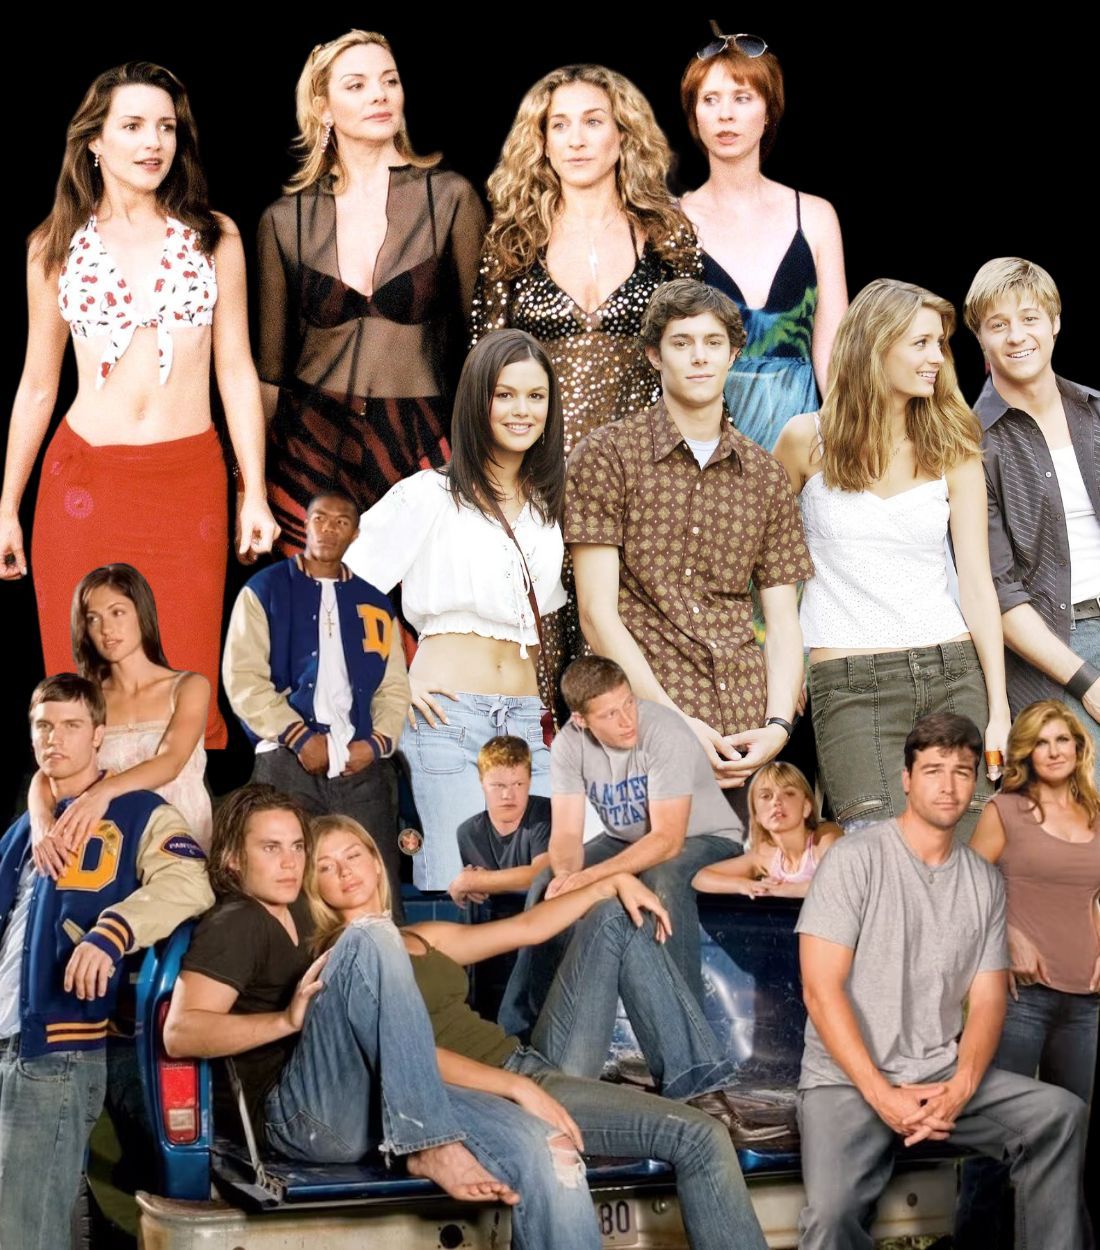 The OC, Sex and the City, Friday Night Lights